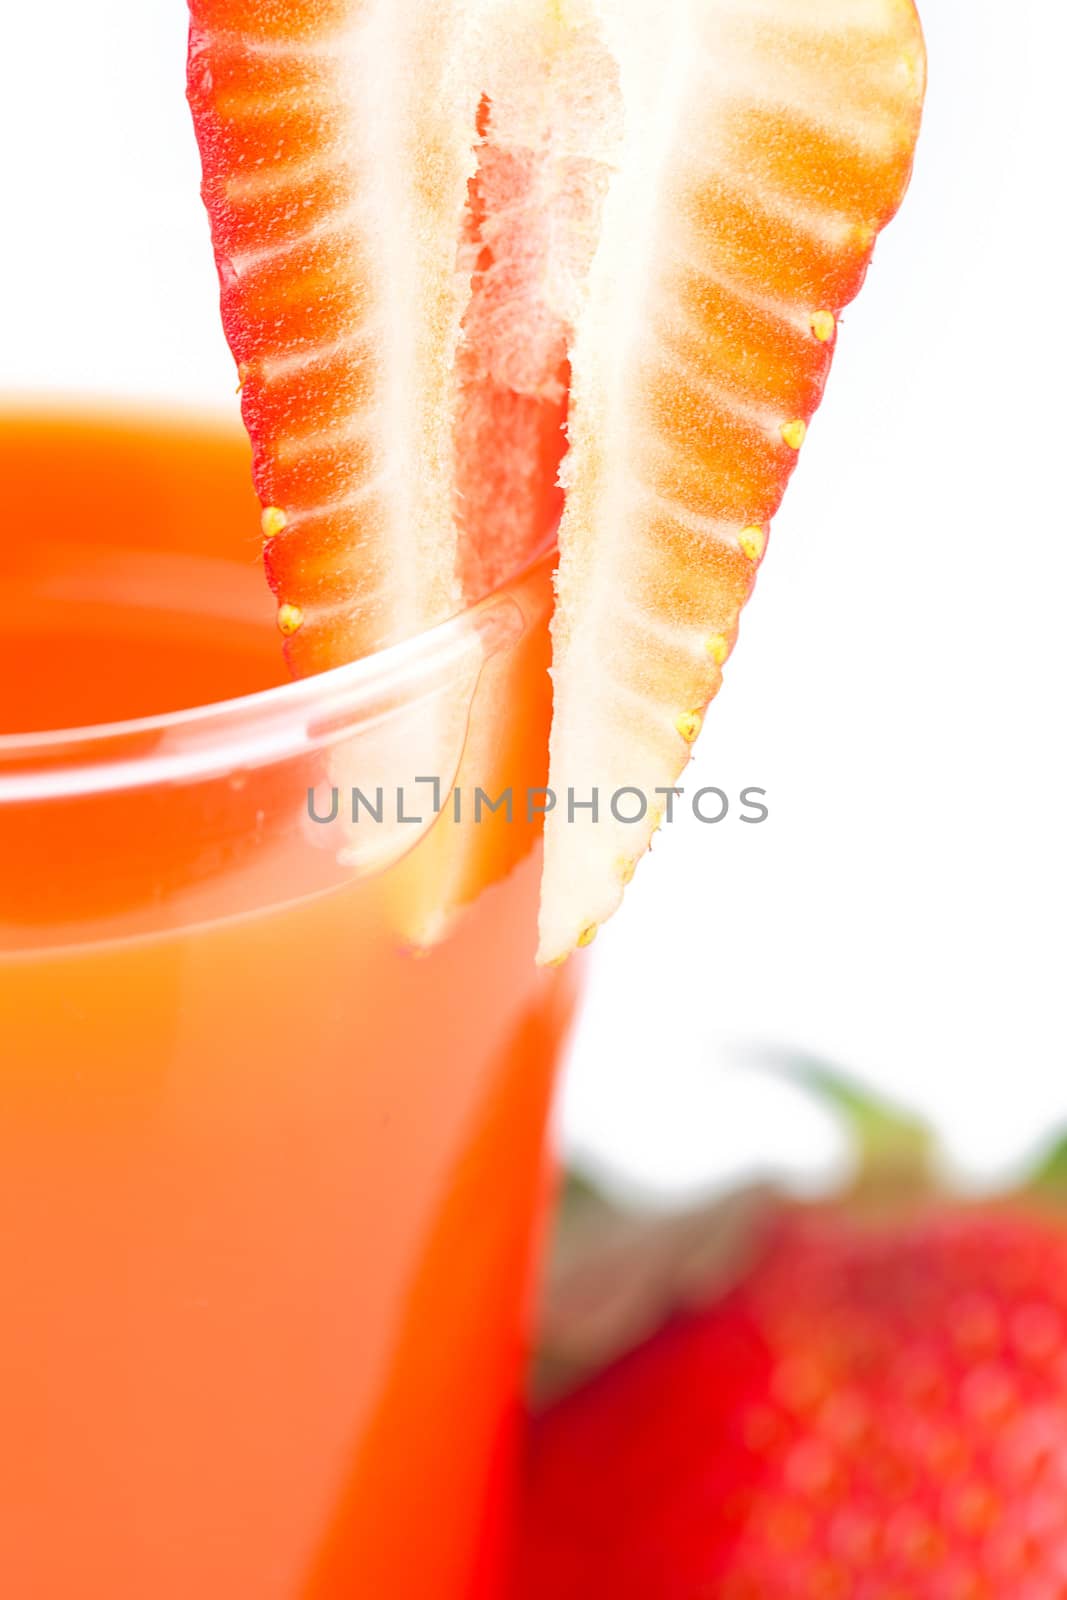 strawberry and a glass of strawberry juice isolated on white by jannyjus